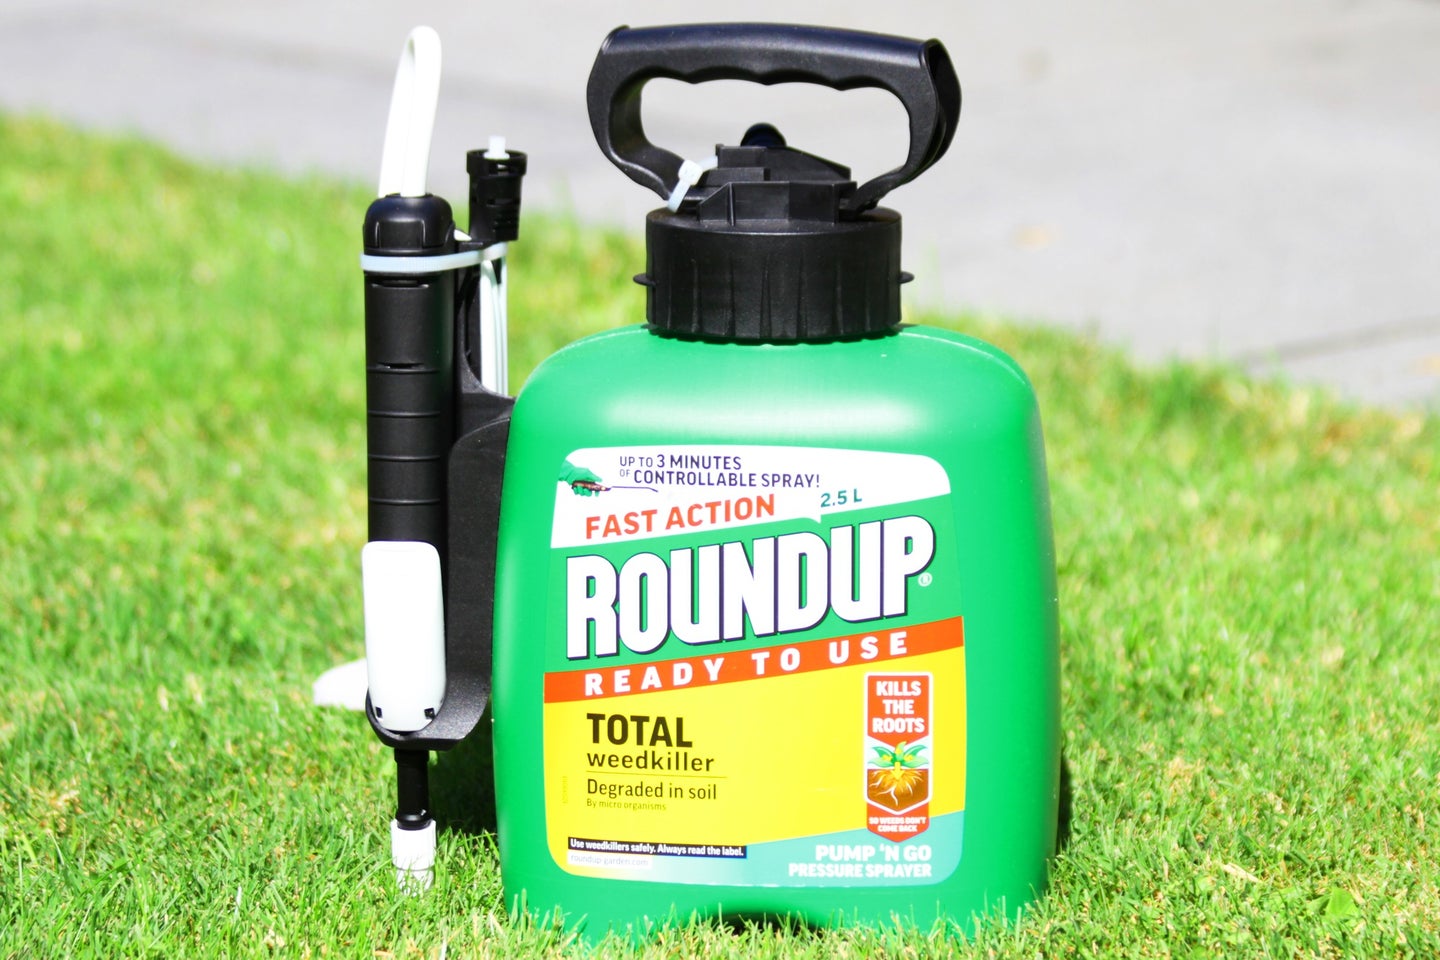 Roundup herbicide bottle on lawn